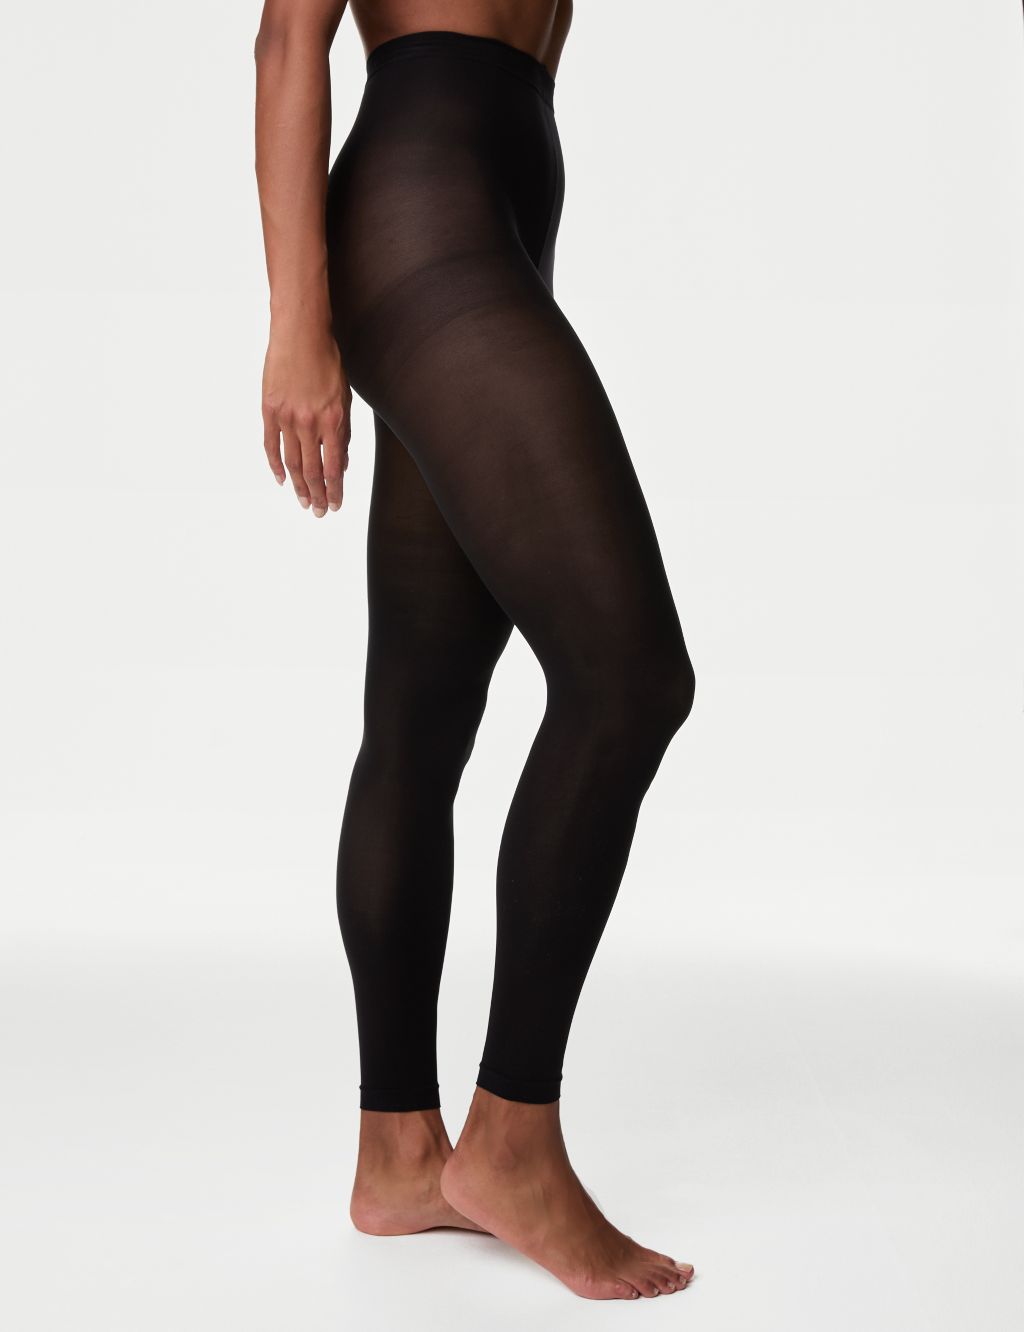 Buy Spanx women plain fabulous footless tights nude Online